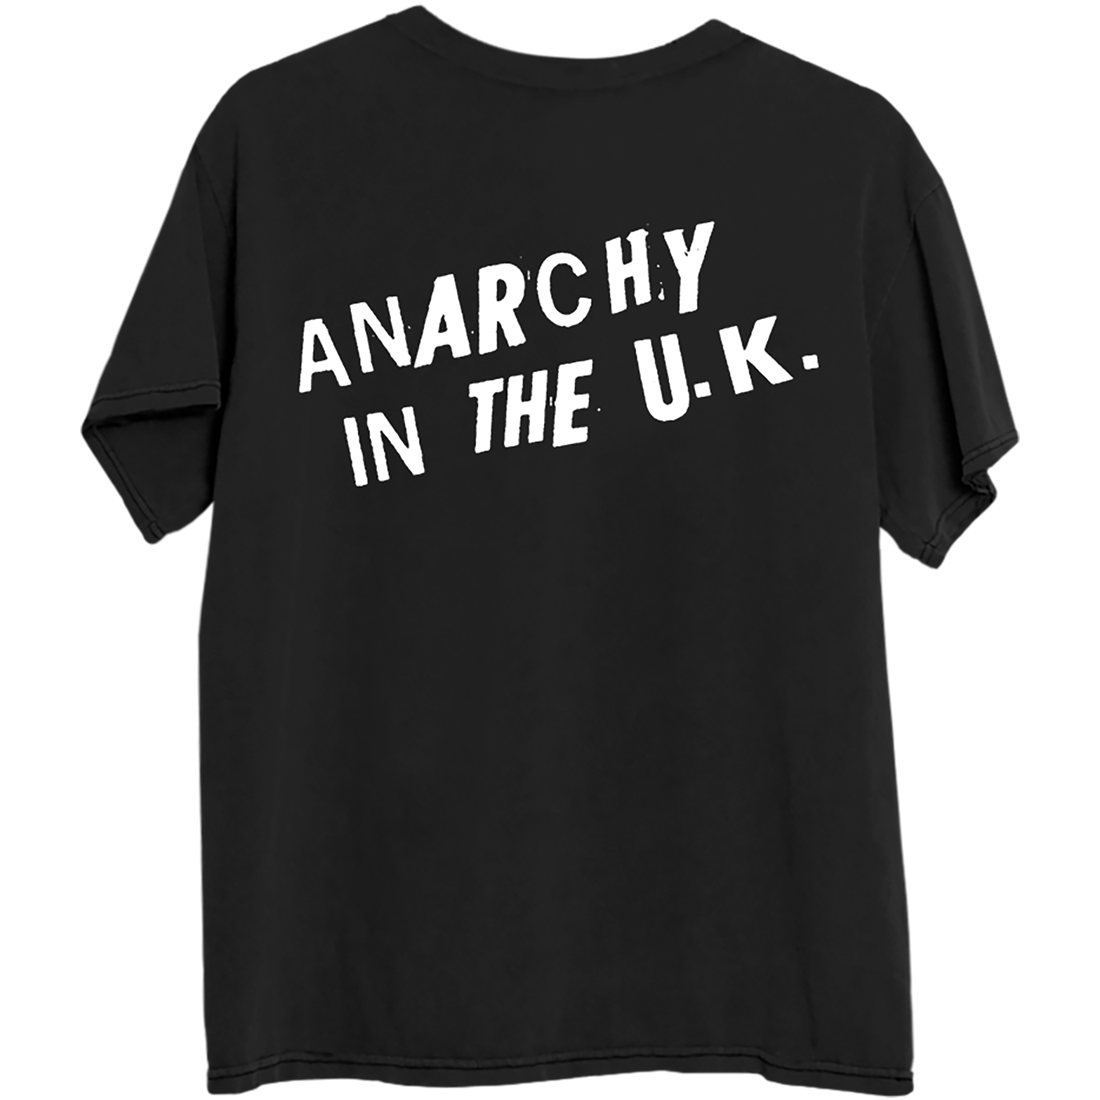 Sex Pistols - Anarchy in the UK Out Soon Black T-Shirt